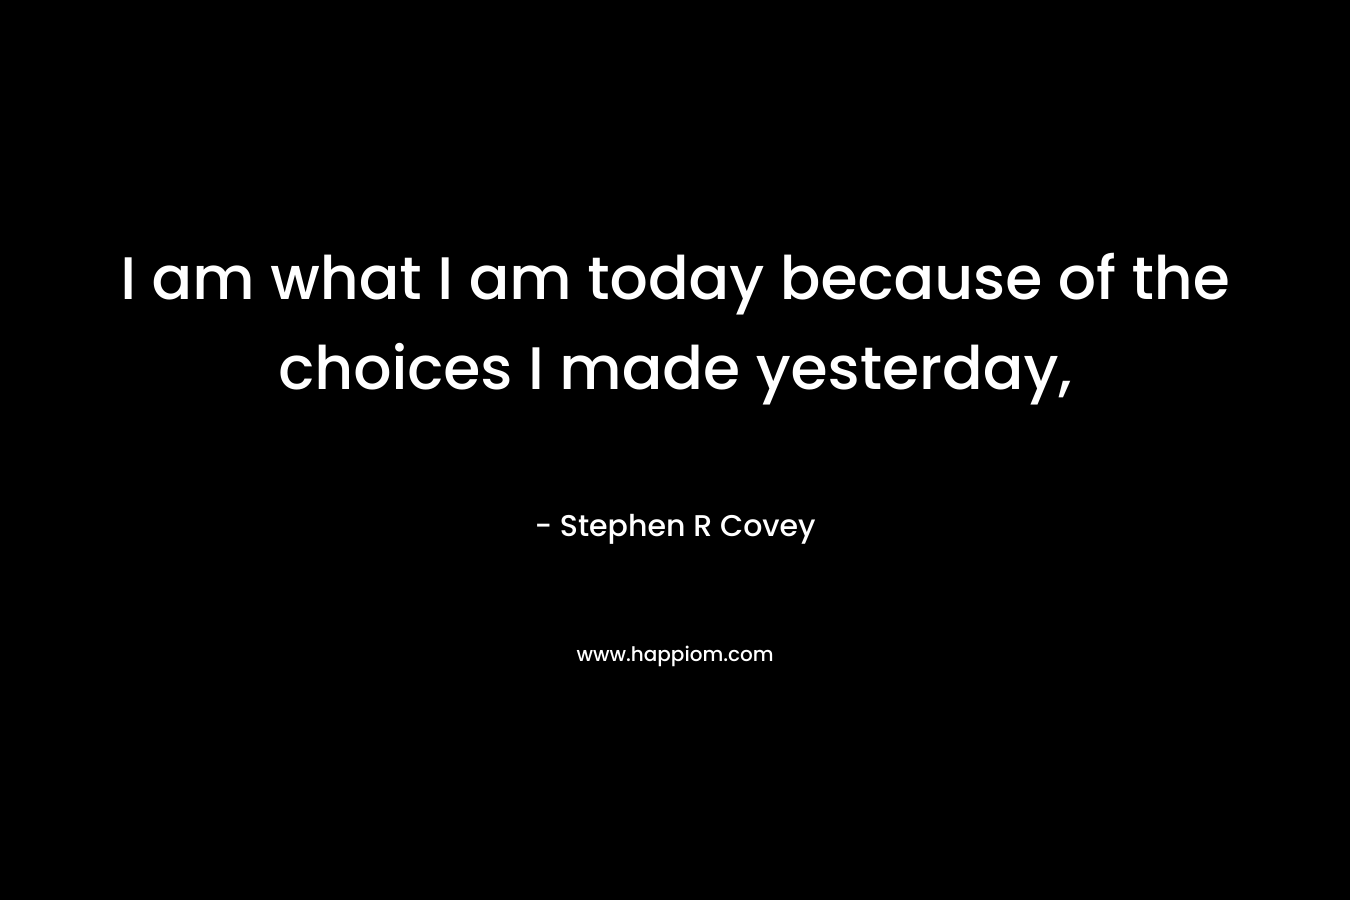 I am what I am today because of the choices I made yesterday,